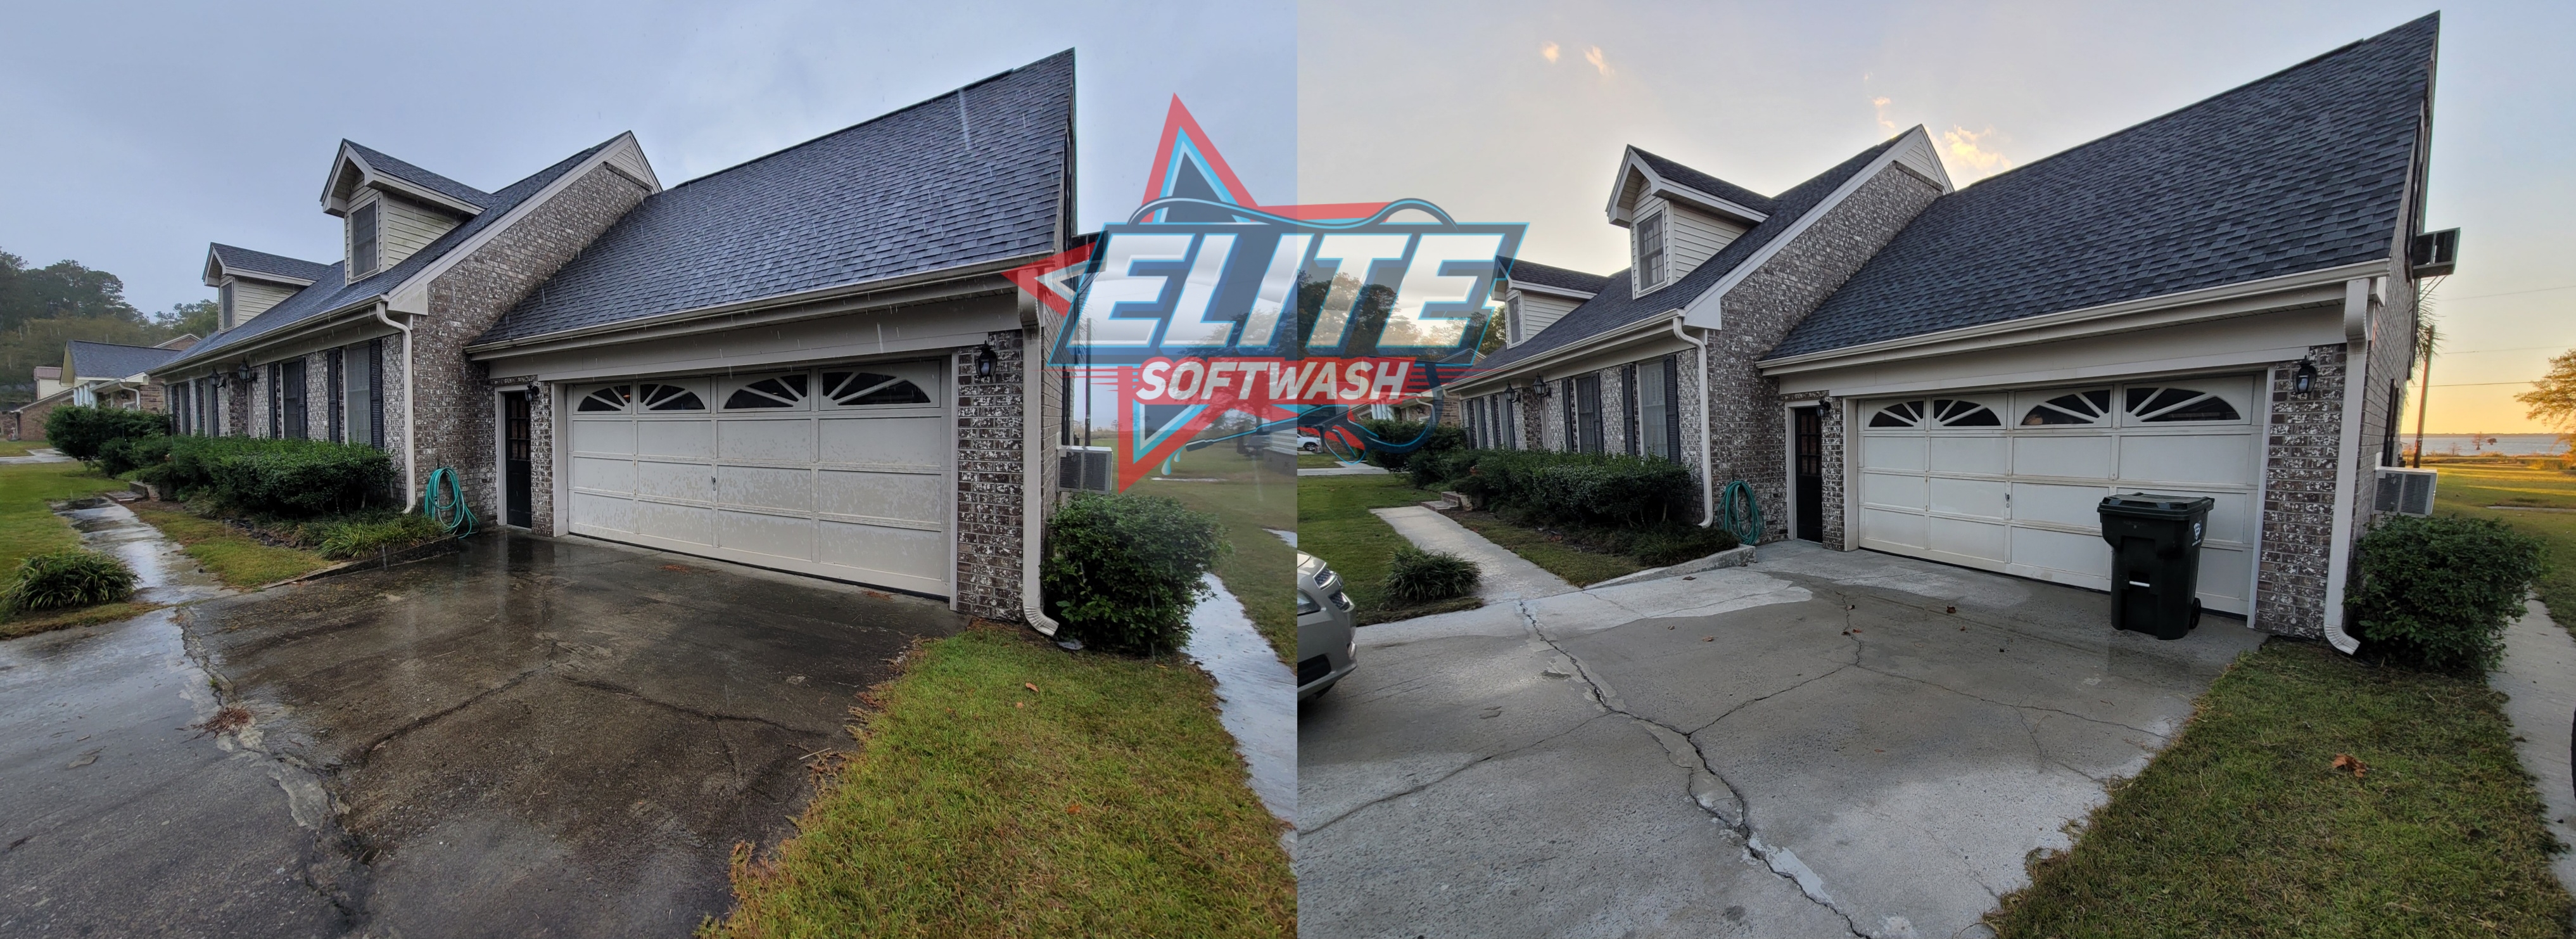 Top Quality Exterior Softwashing, Concrete Cleaning & Brick Cleaning in Moncks Corner South Carolina! Image